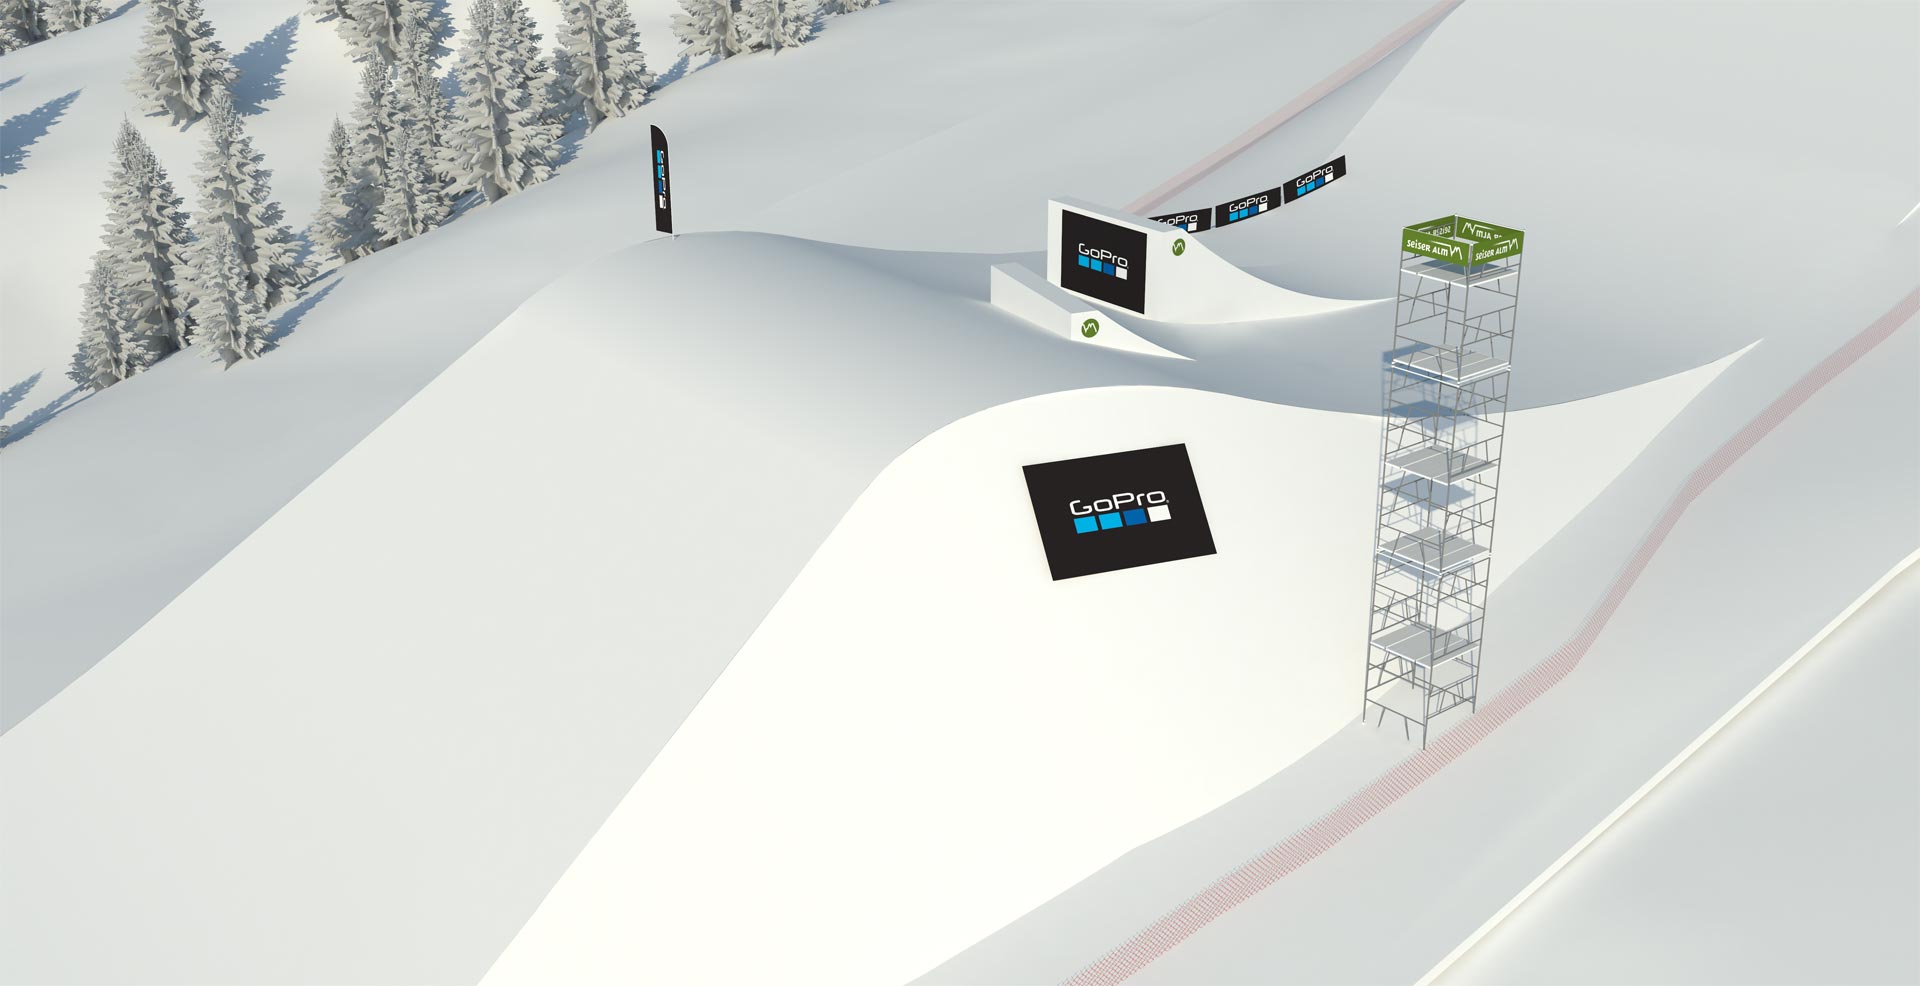 FIS Slopestyle Weltcup Seiser Alm